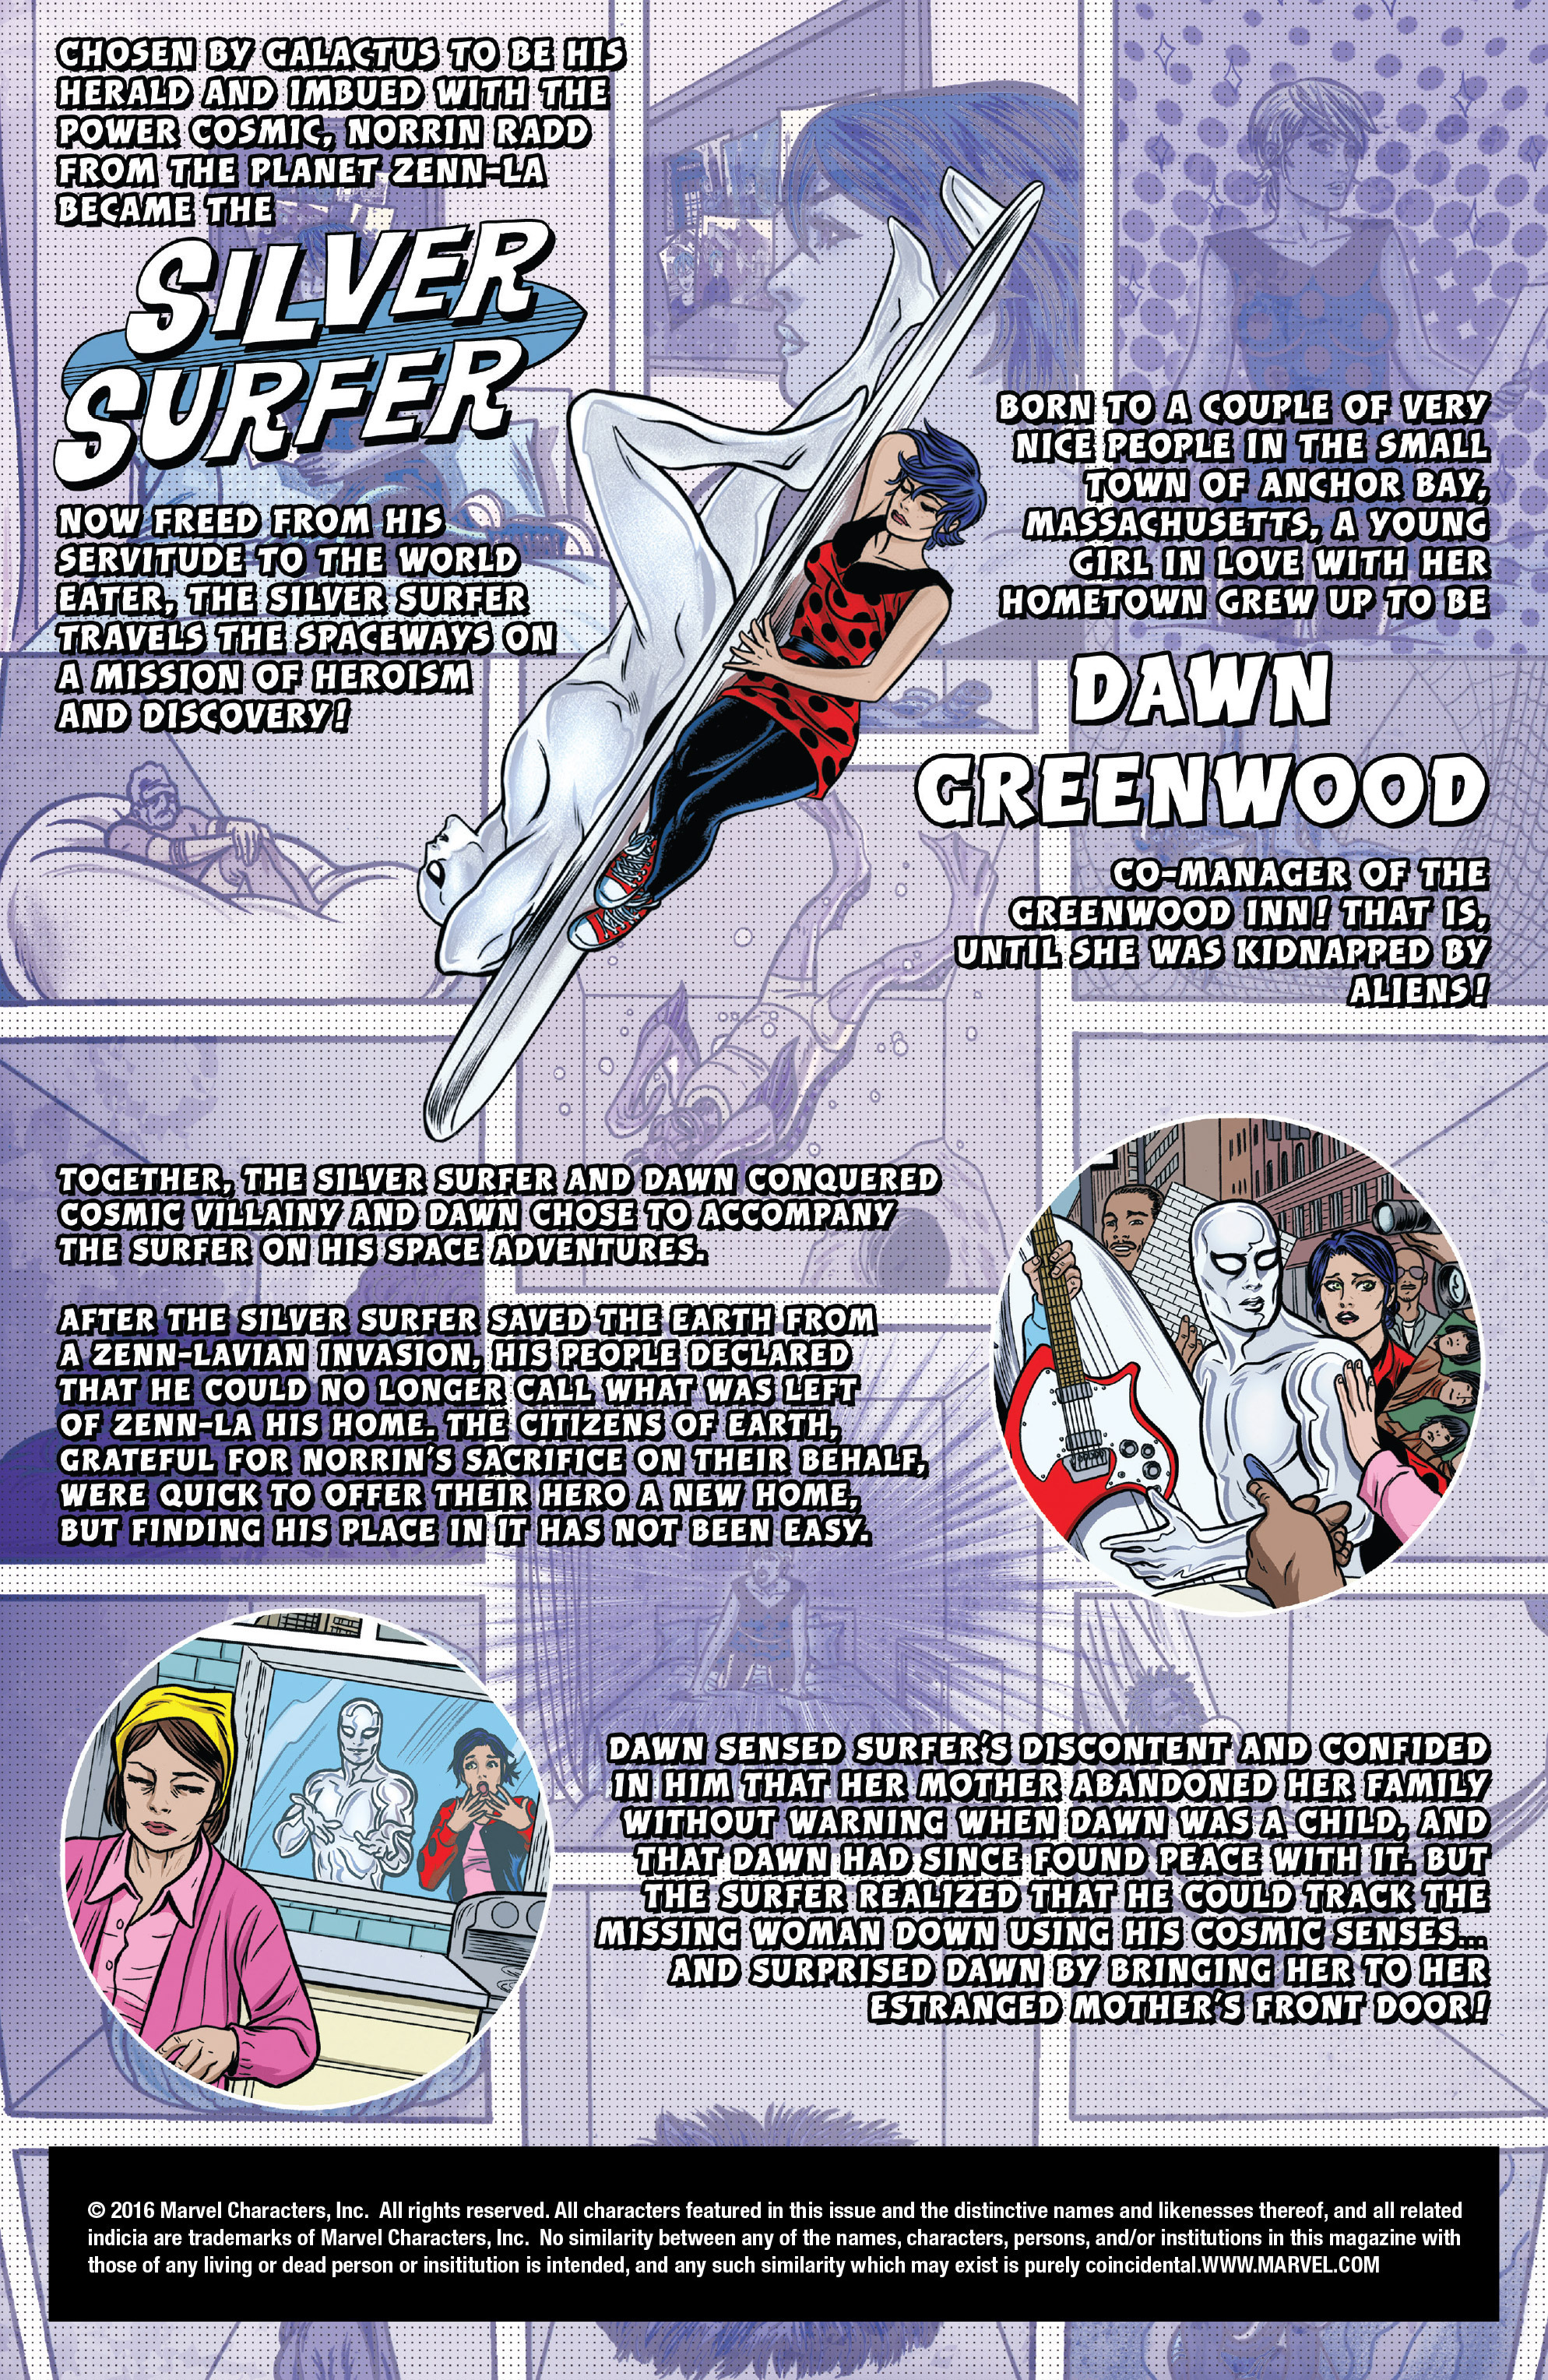 Silver Surfer (2016-): Chapter 6 - Page 2